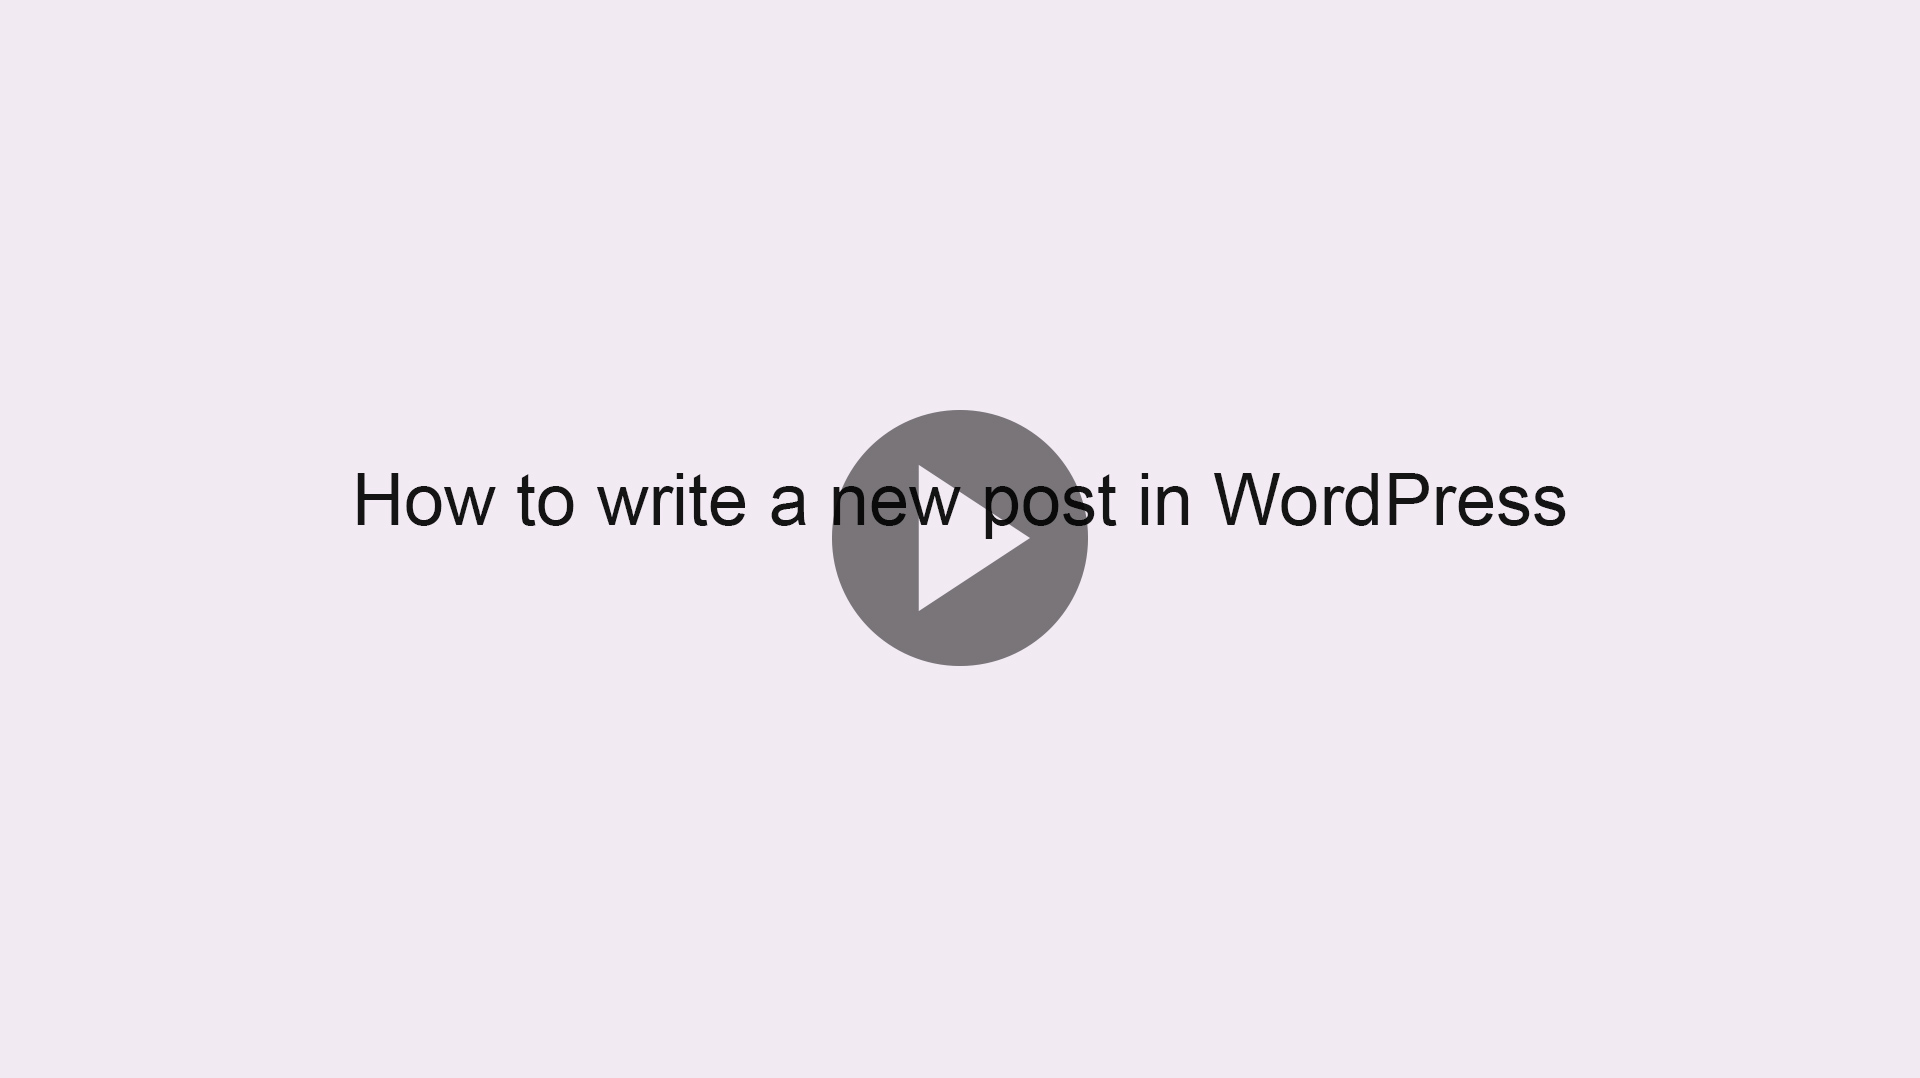 How to write a new post in WordPress